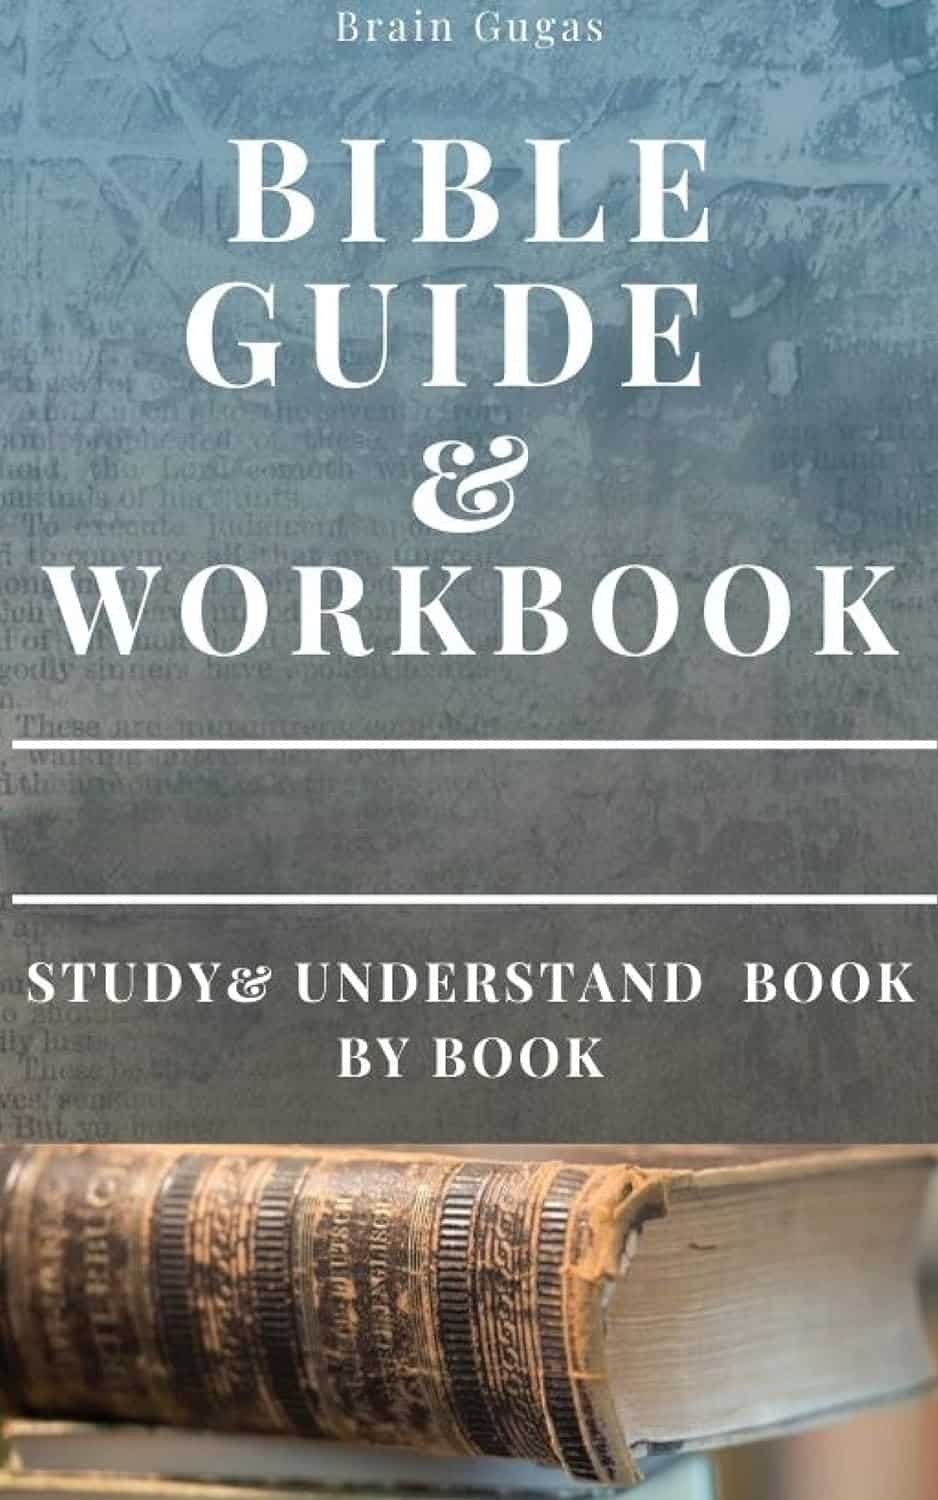 Bible Guide and Workbook by Brian Gugas